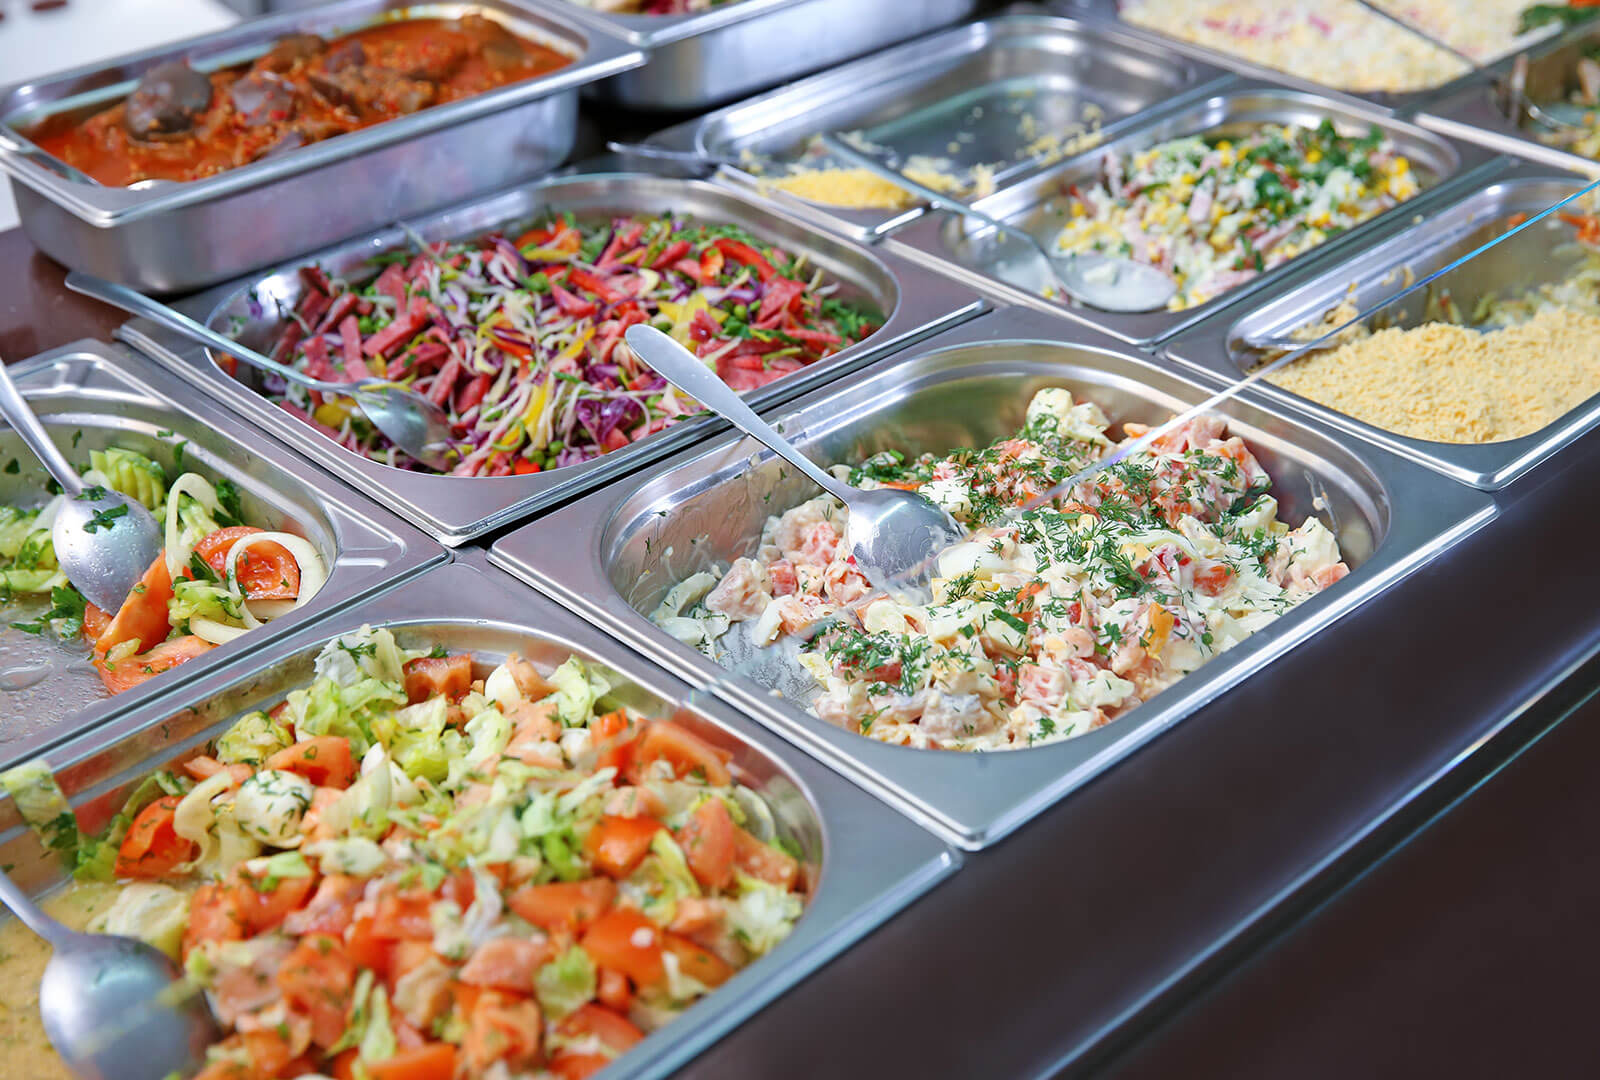 Healthy looking food choices in trays for lunch service